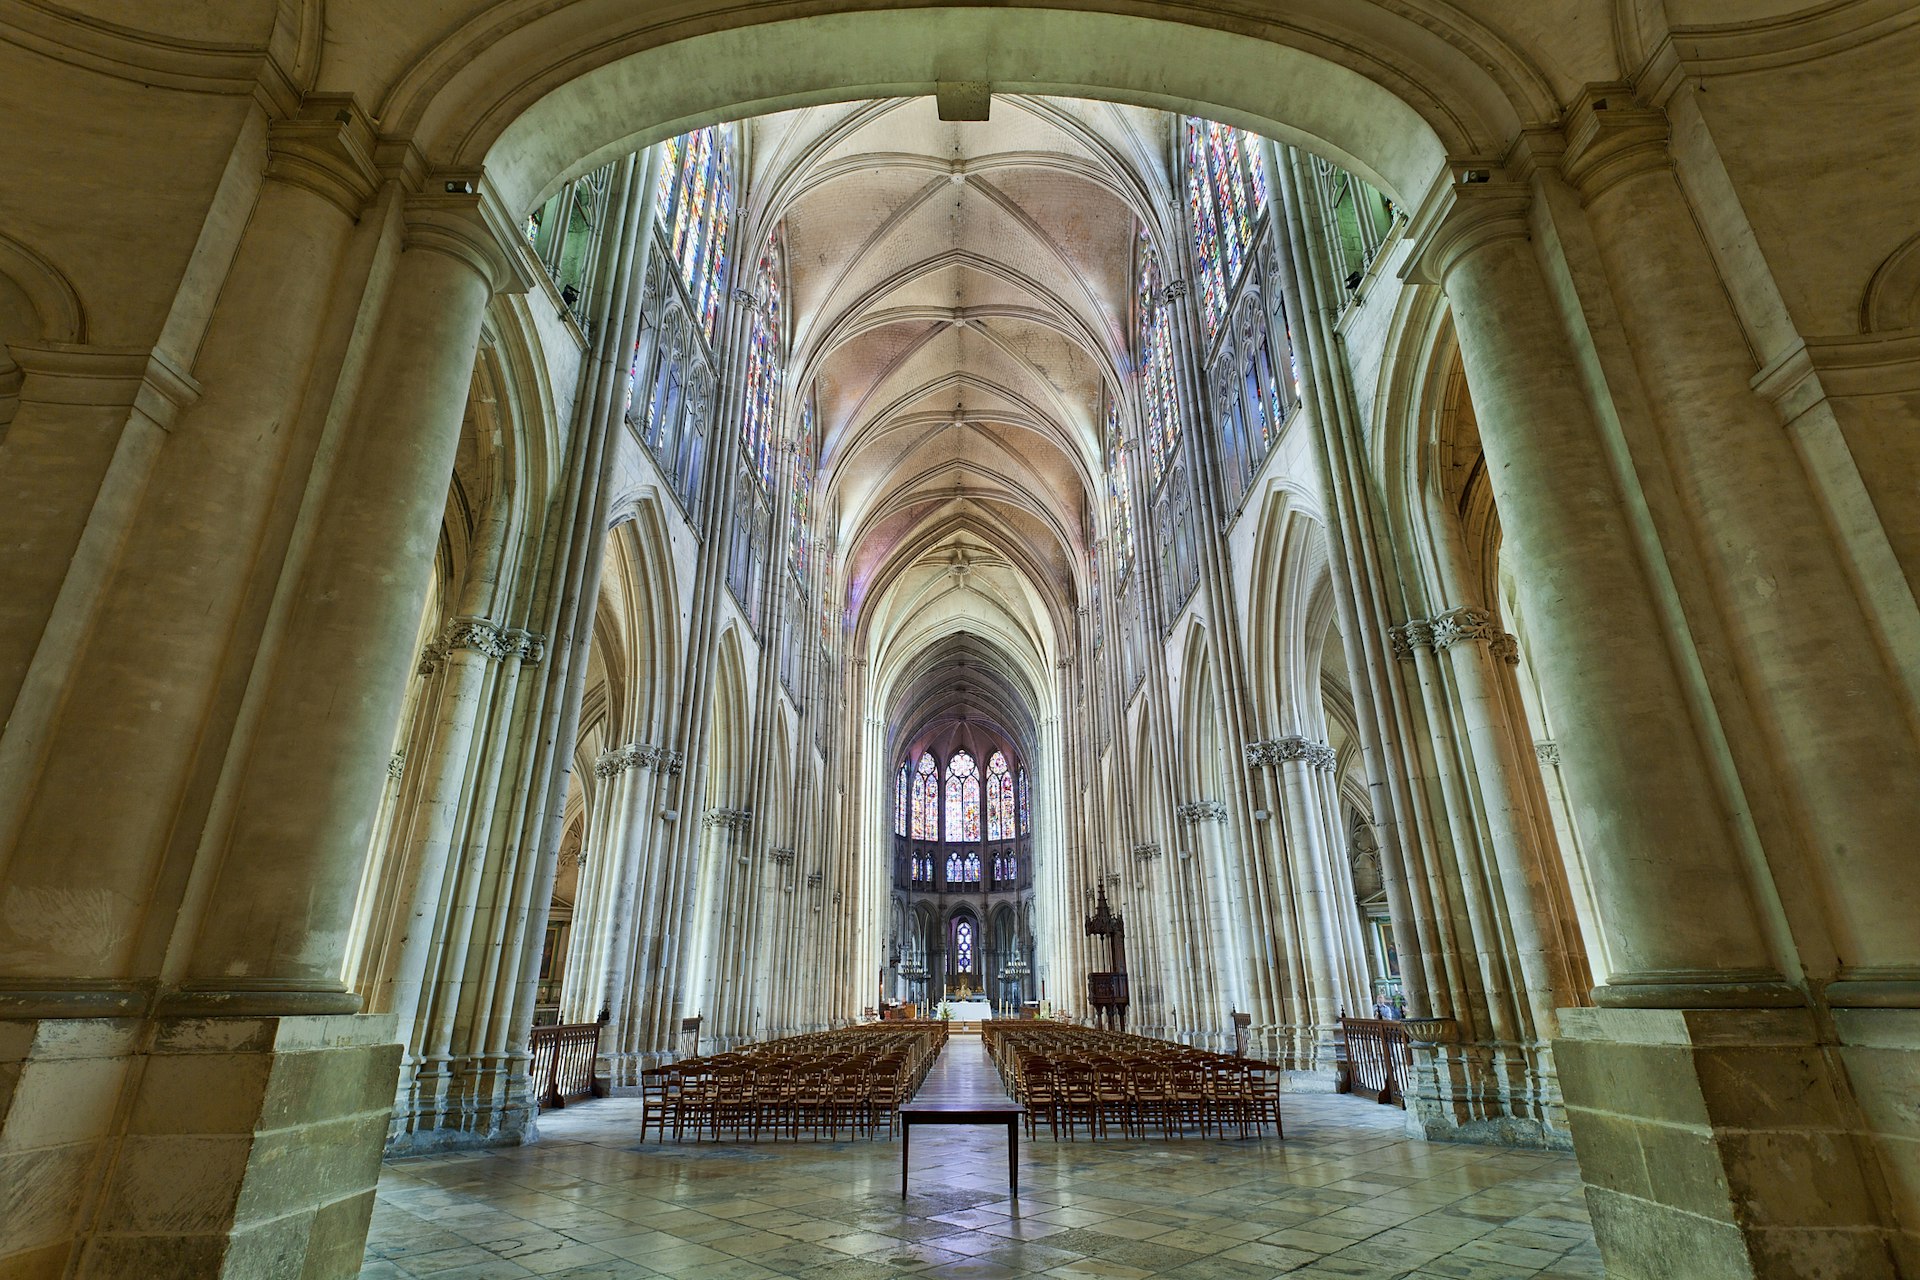 A huge columned church nave glowing with the color of the sun shining through its stained-glass windows